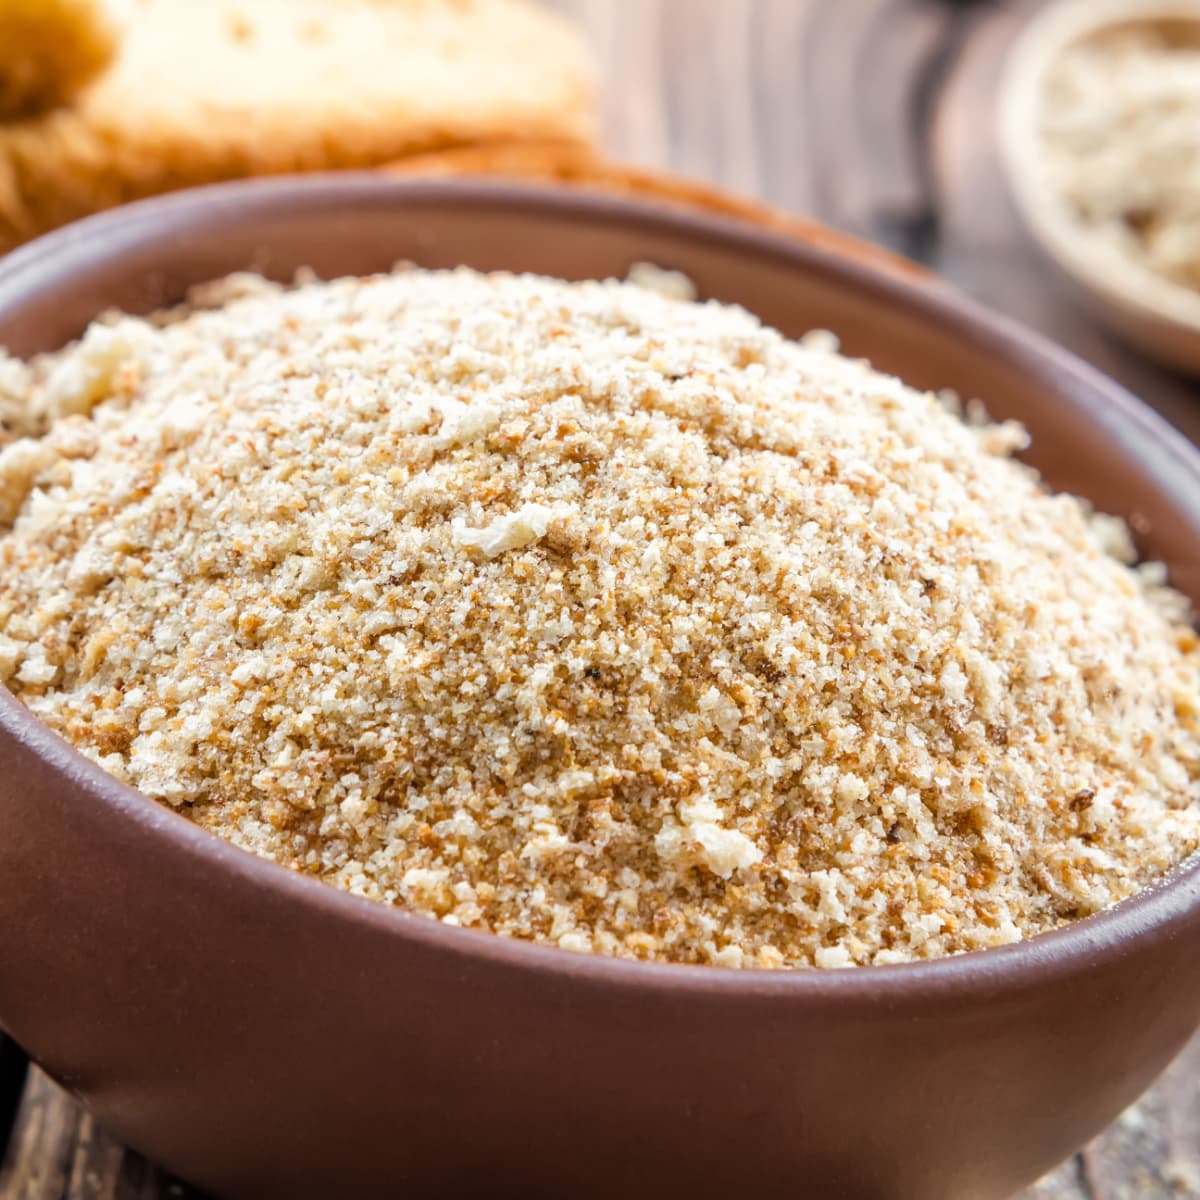 Homemade Breadcrumbs on a Clay Bowl